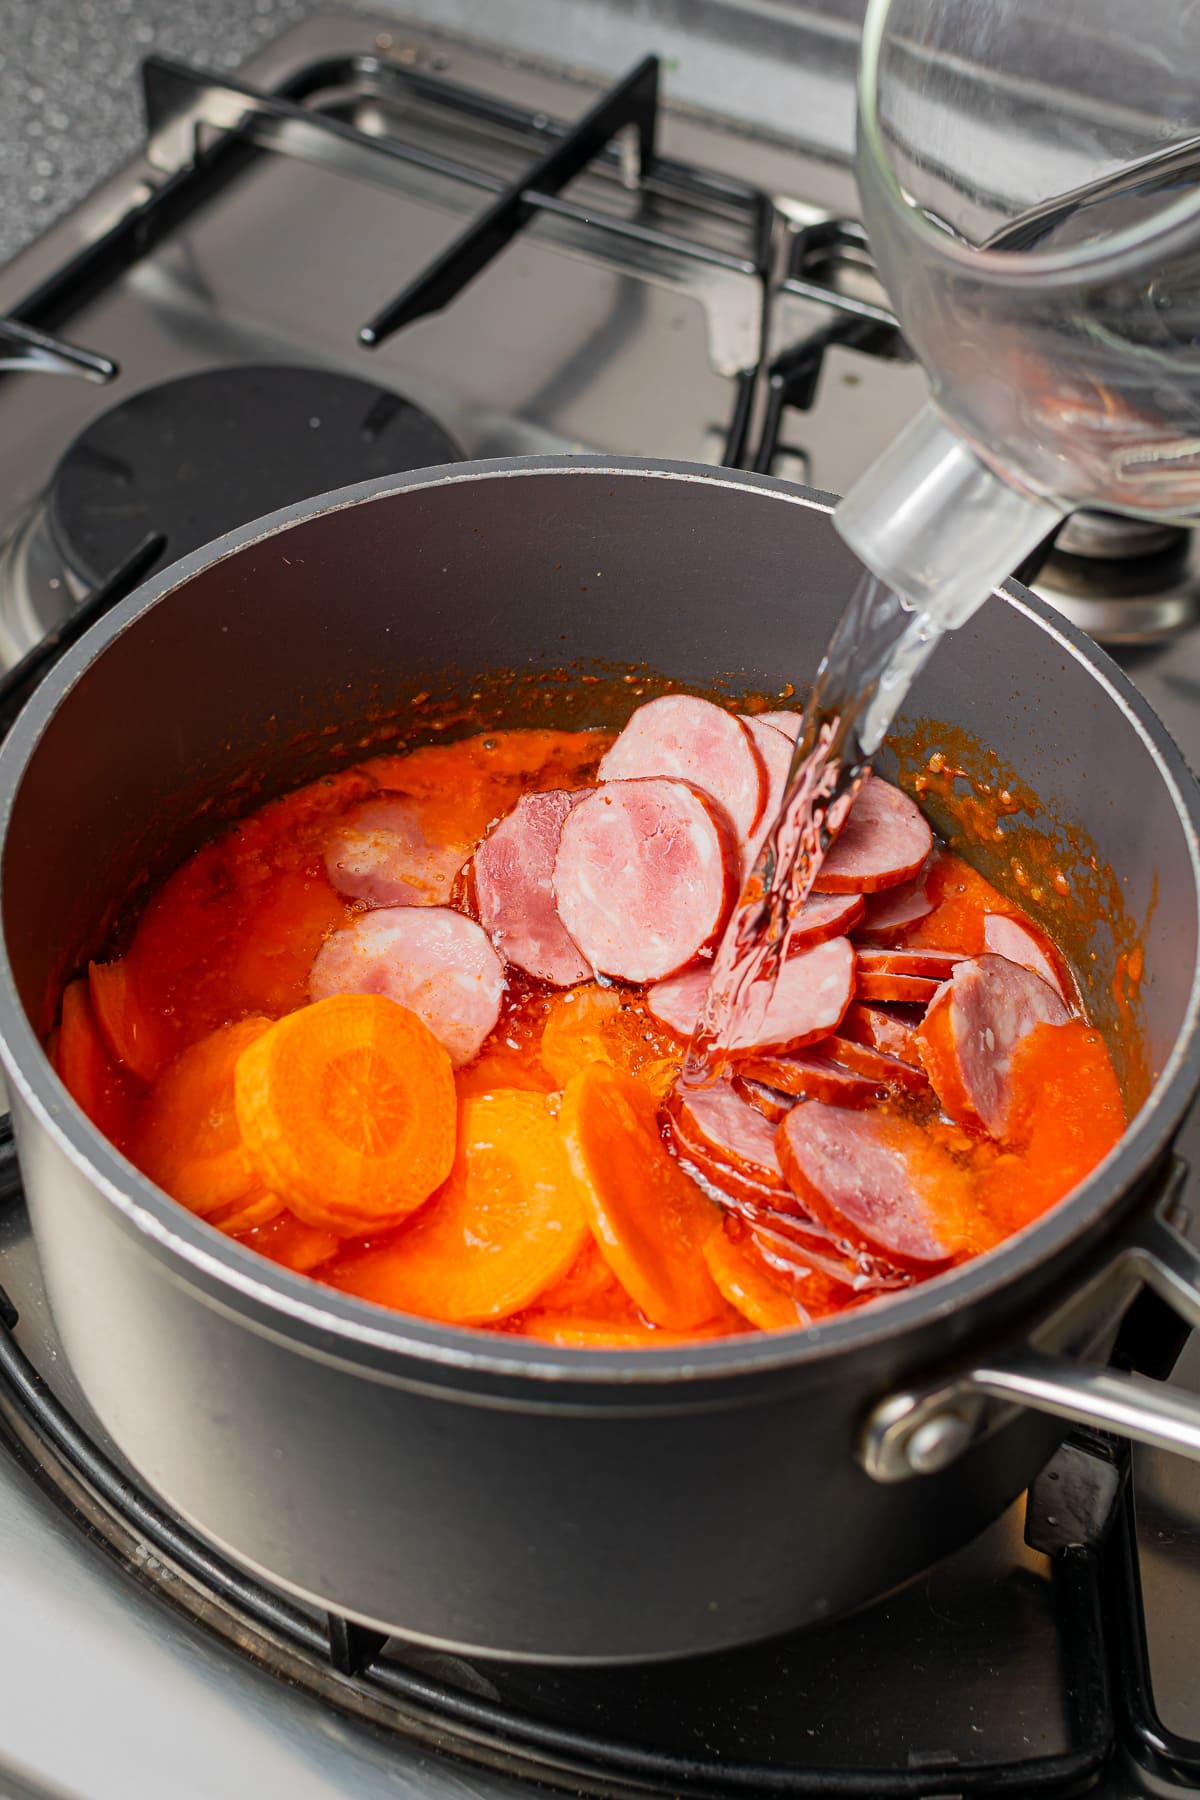 Sliced kielbasa and carrots added to a simmering pot of soup on a stove.